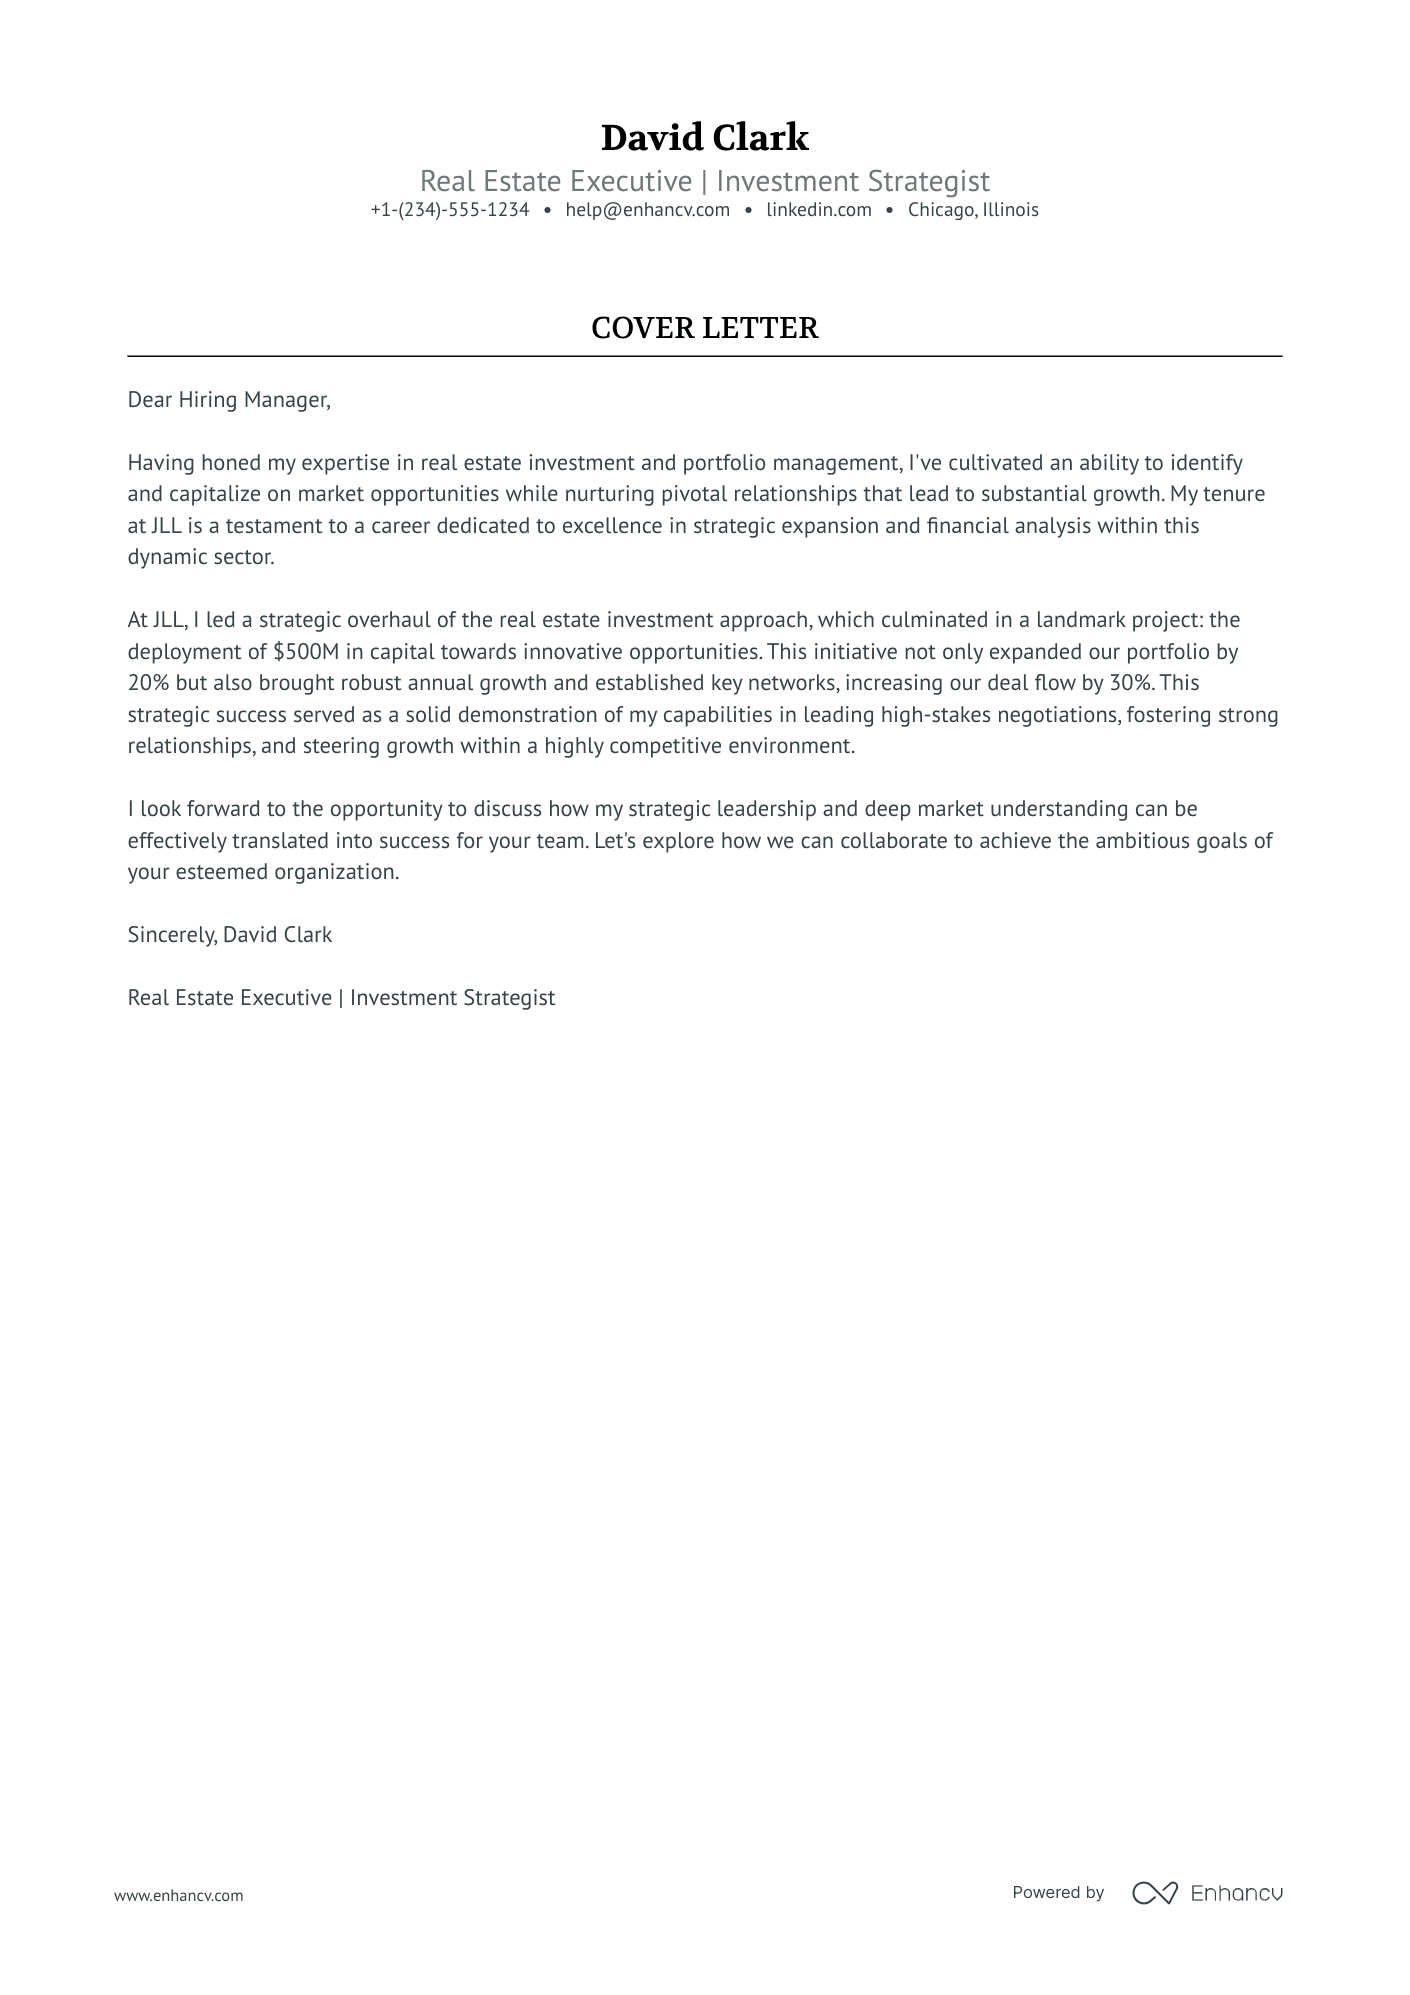 an application letter for ceo